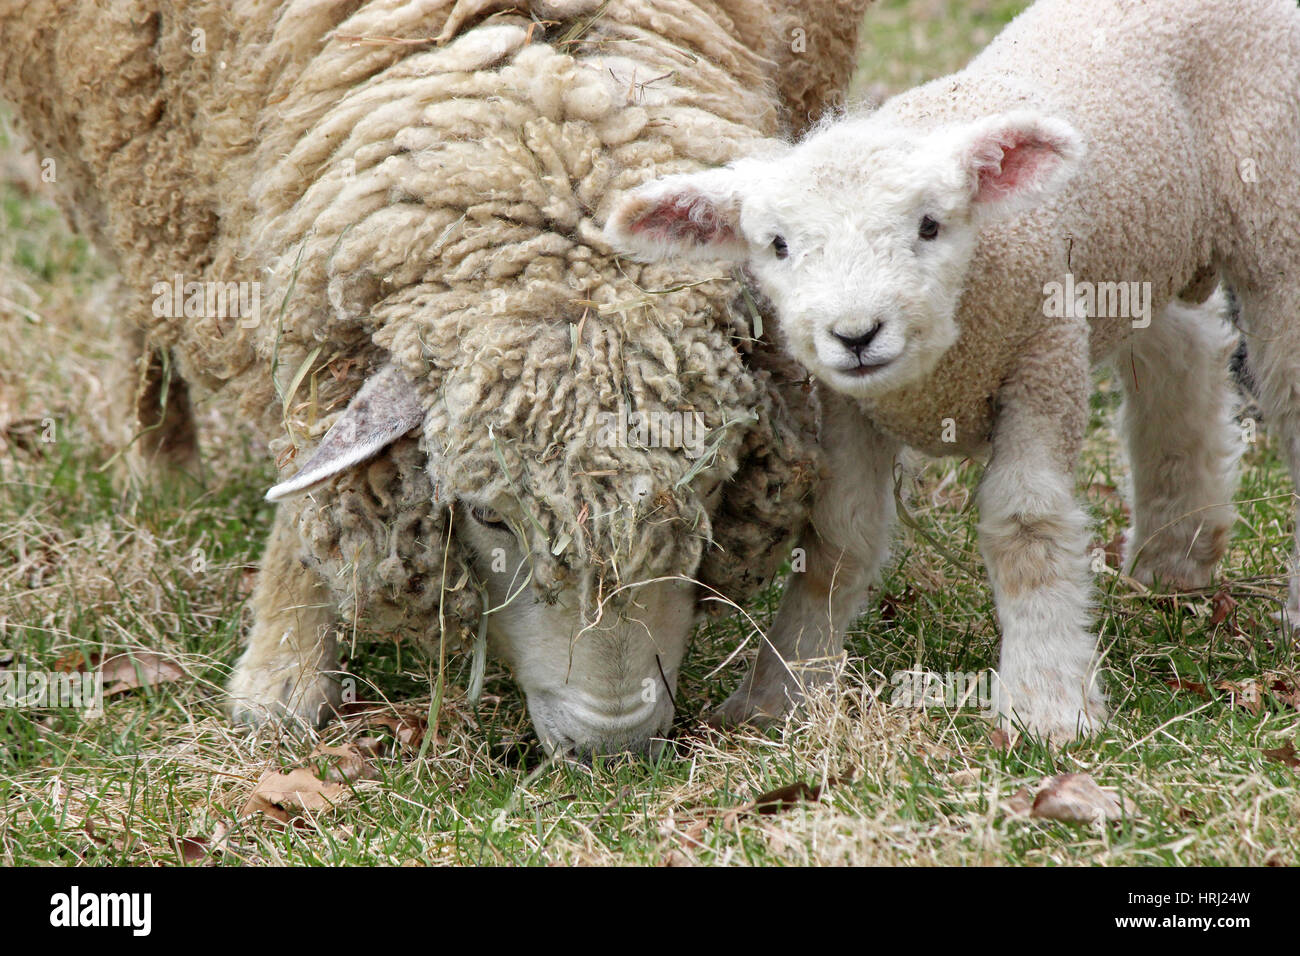 A mother sheep with her newborn lamb in a pasture Stock Photo